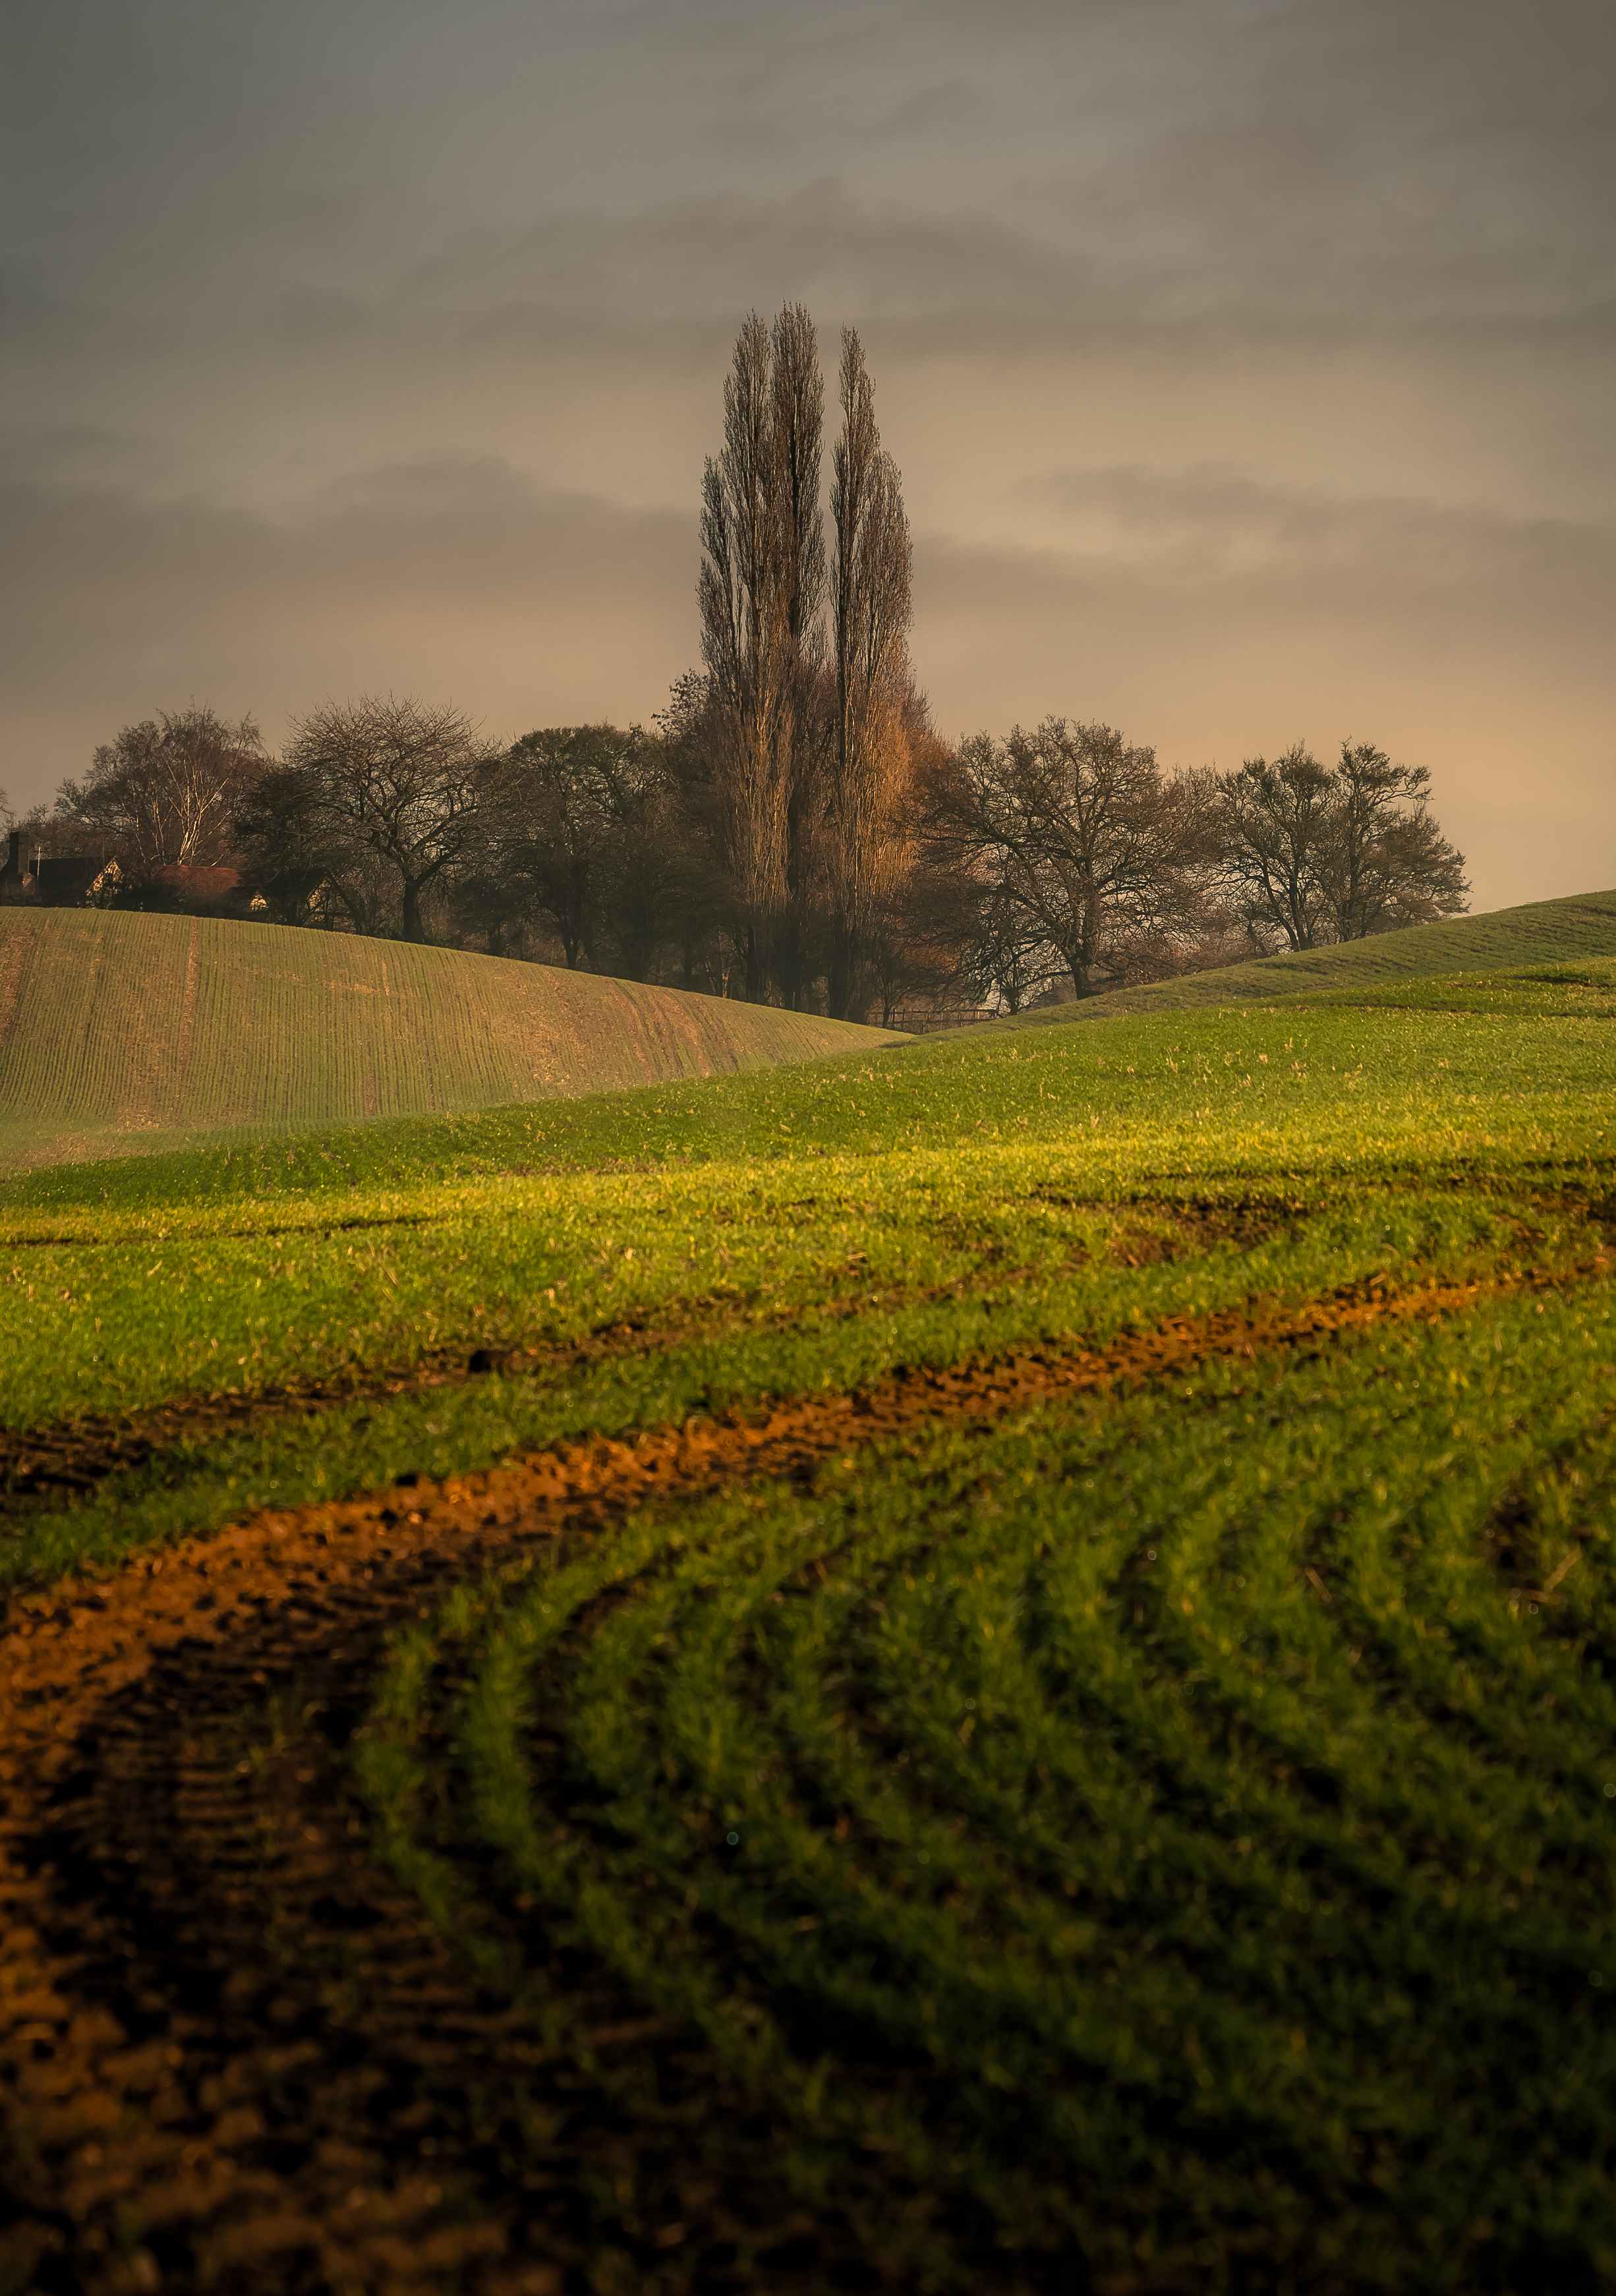 Arable Land Cell Phone Wallpapers